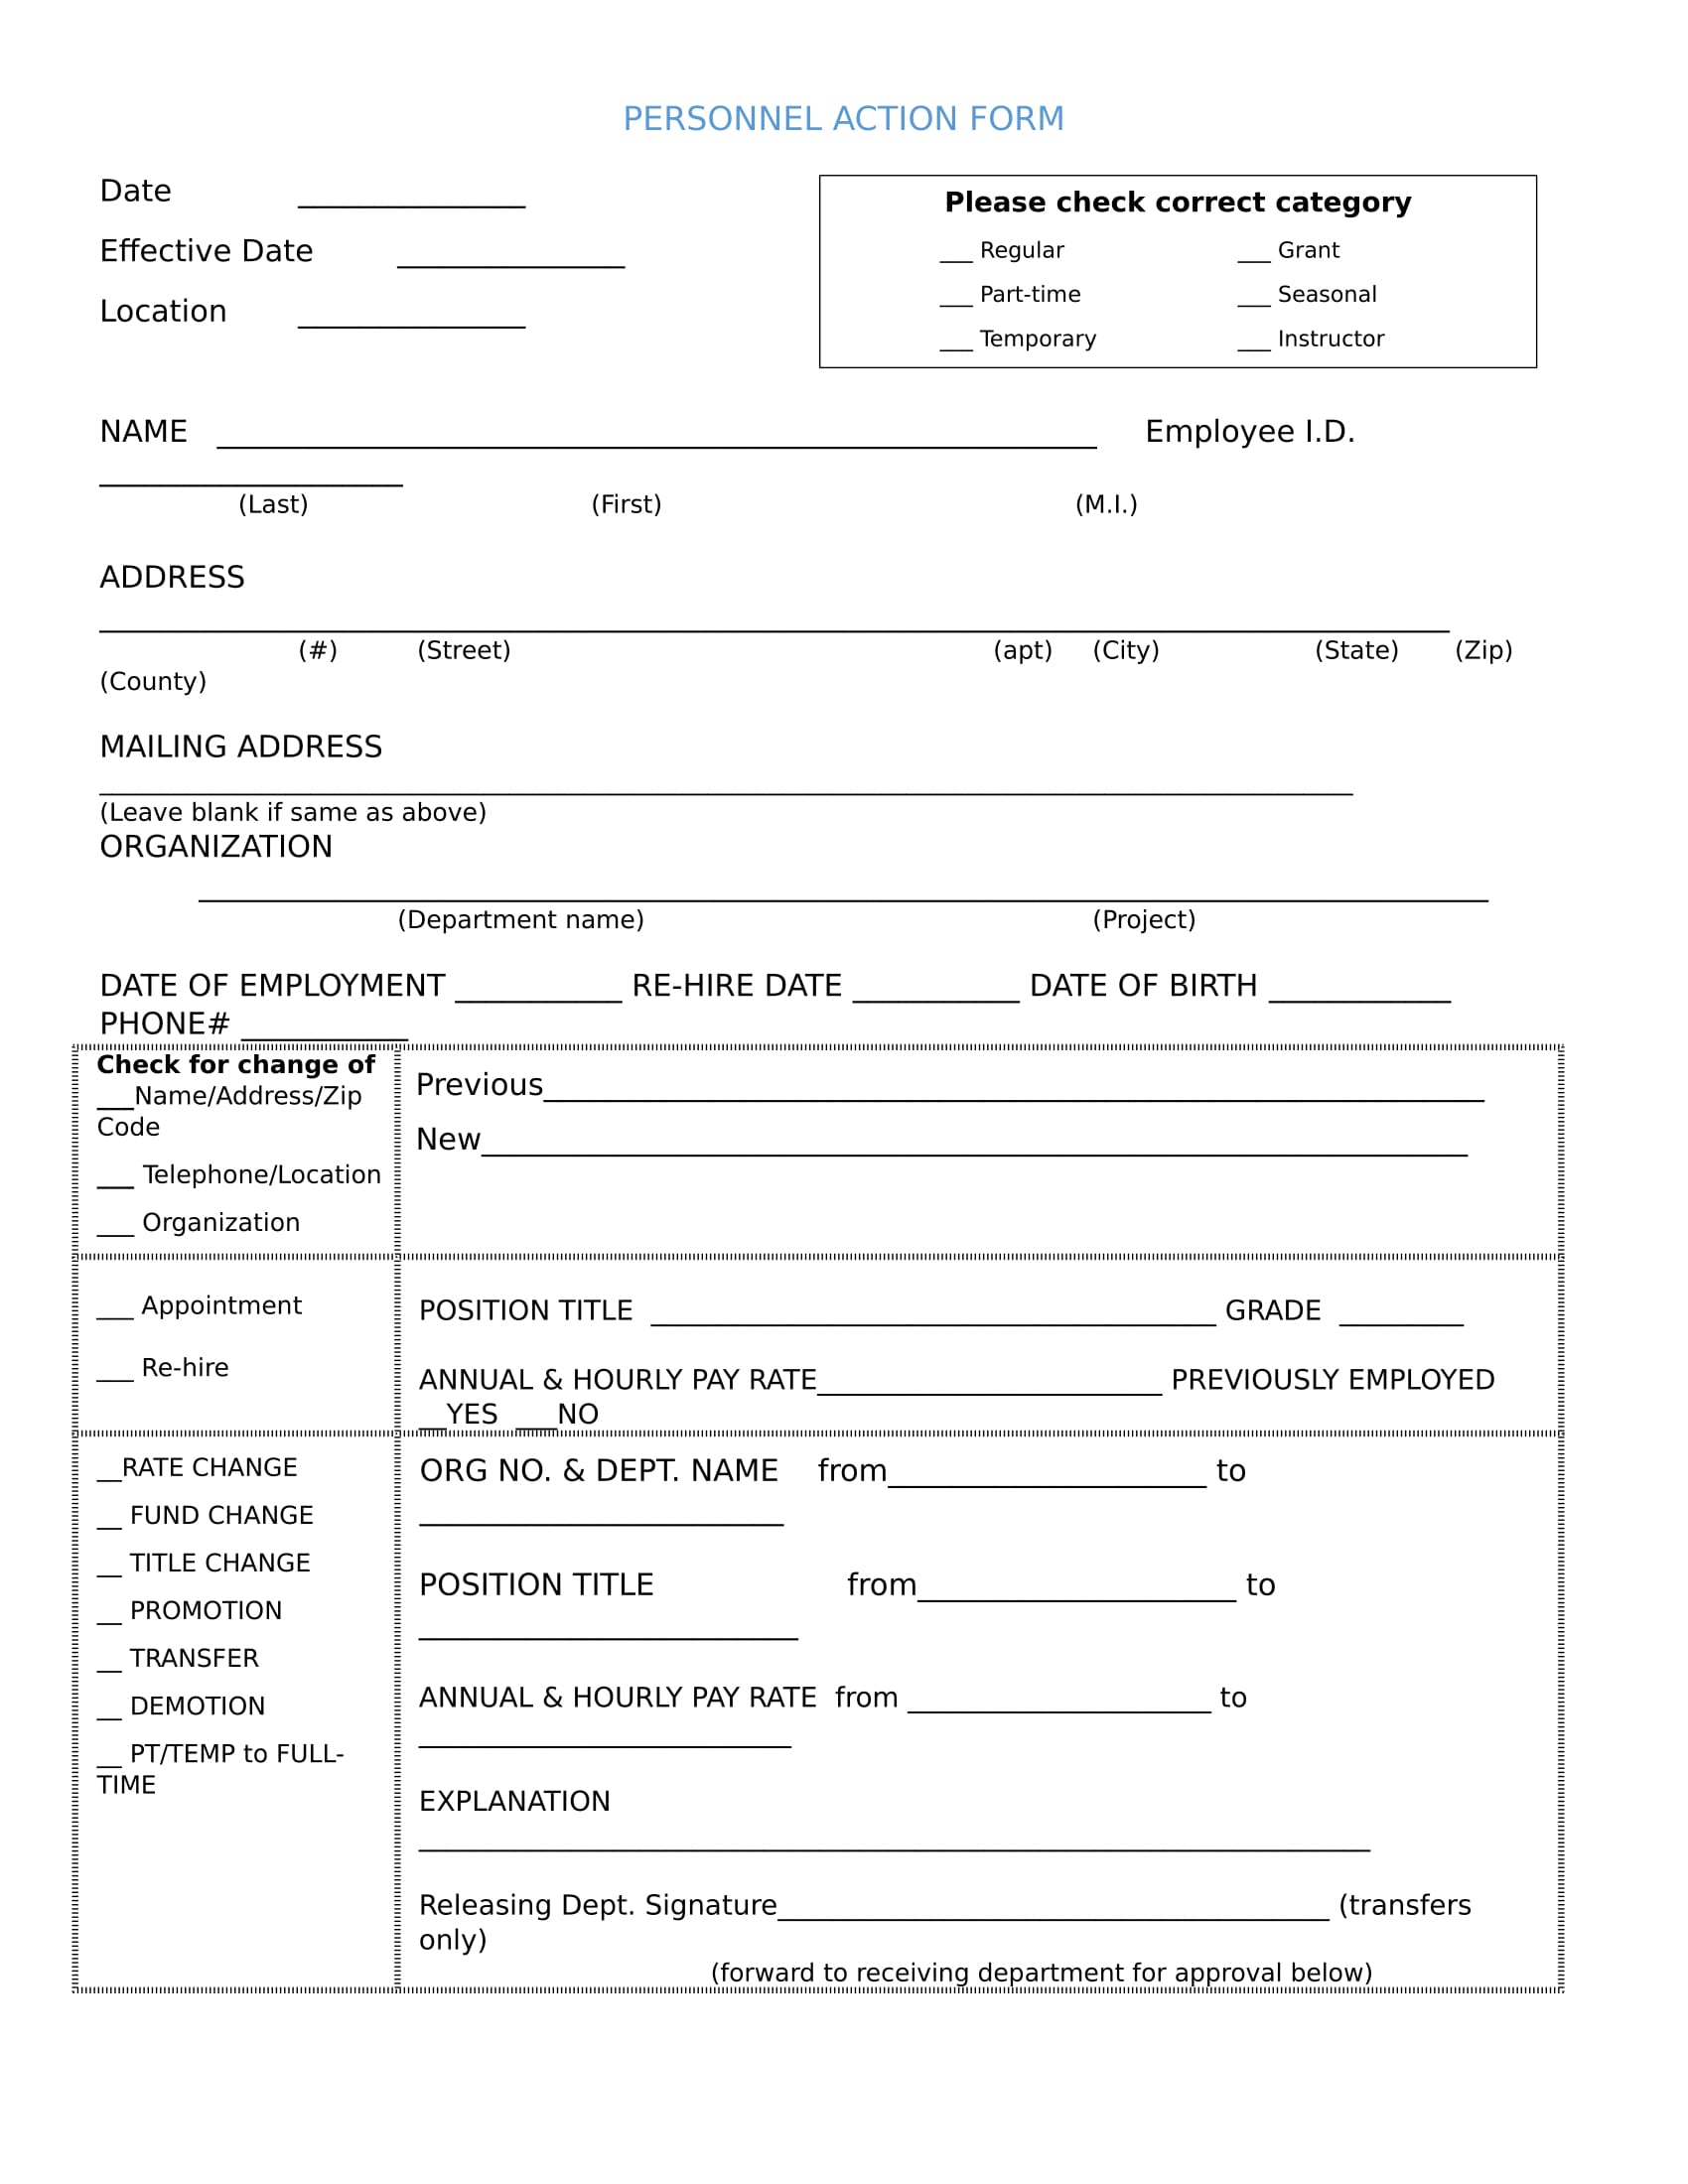 sample personnel action form template 1